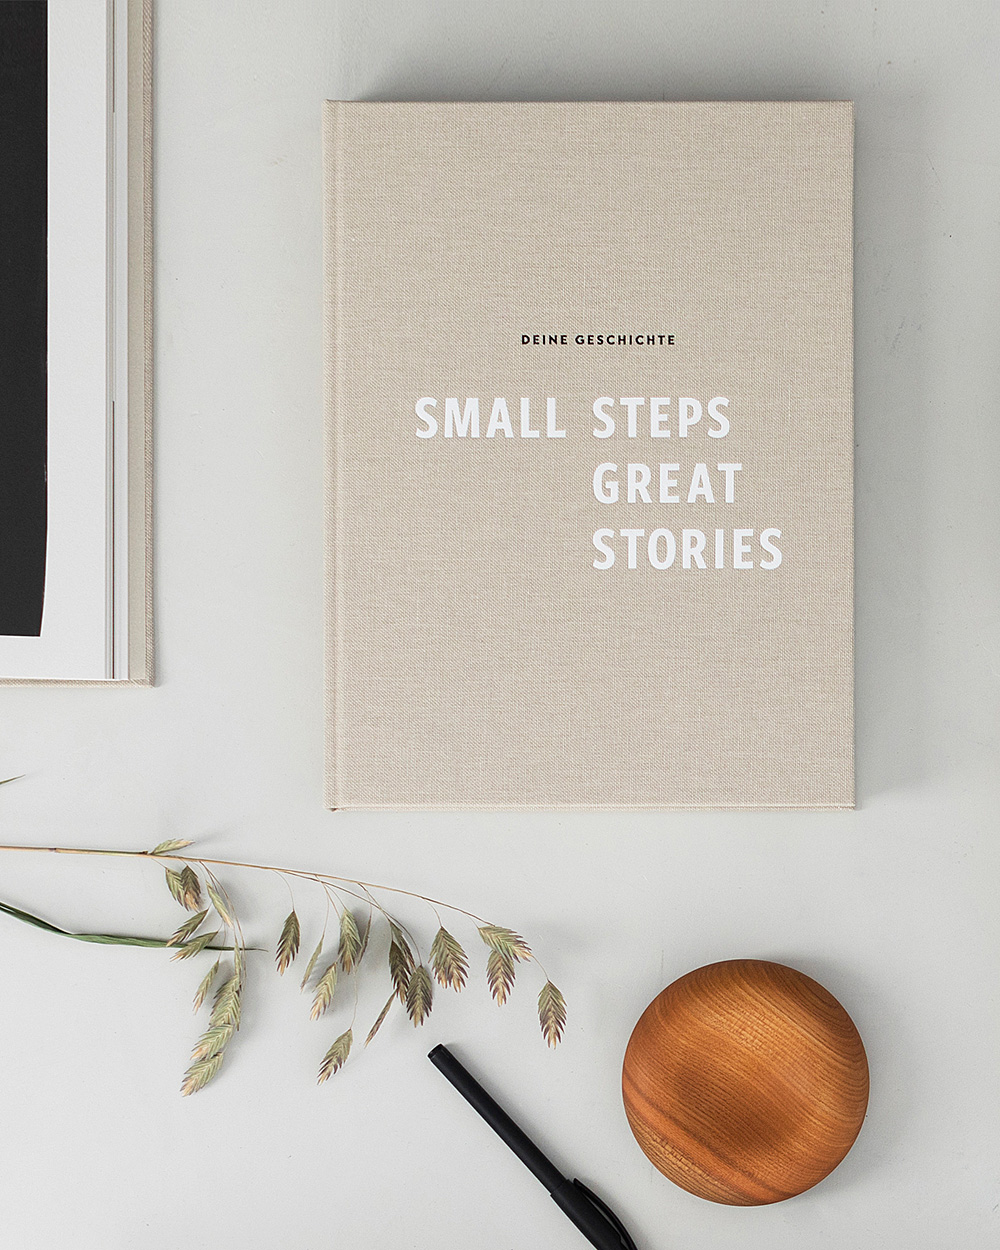 Small steps great stories book